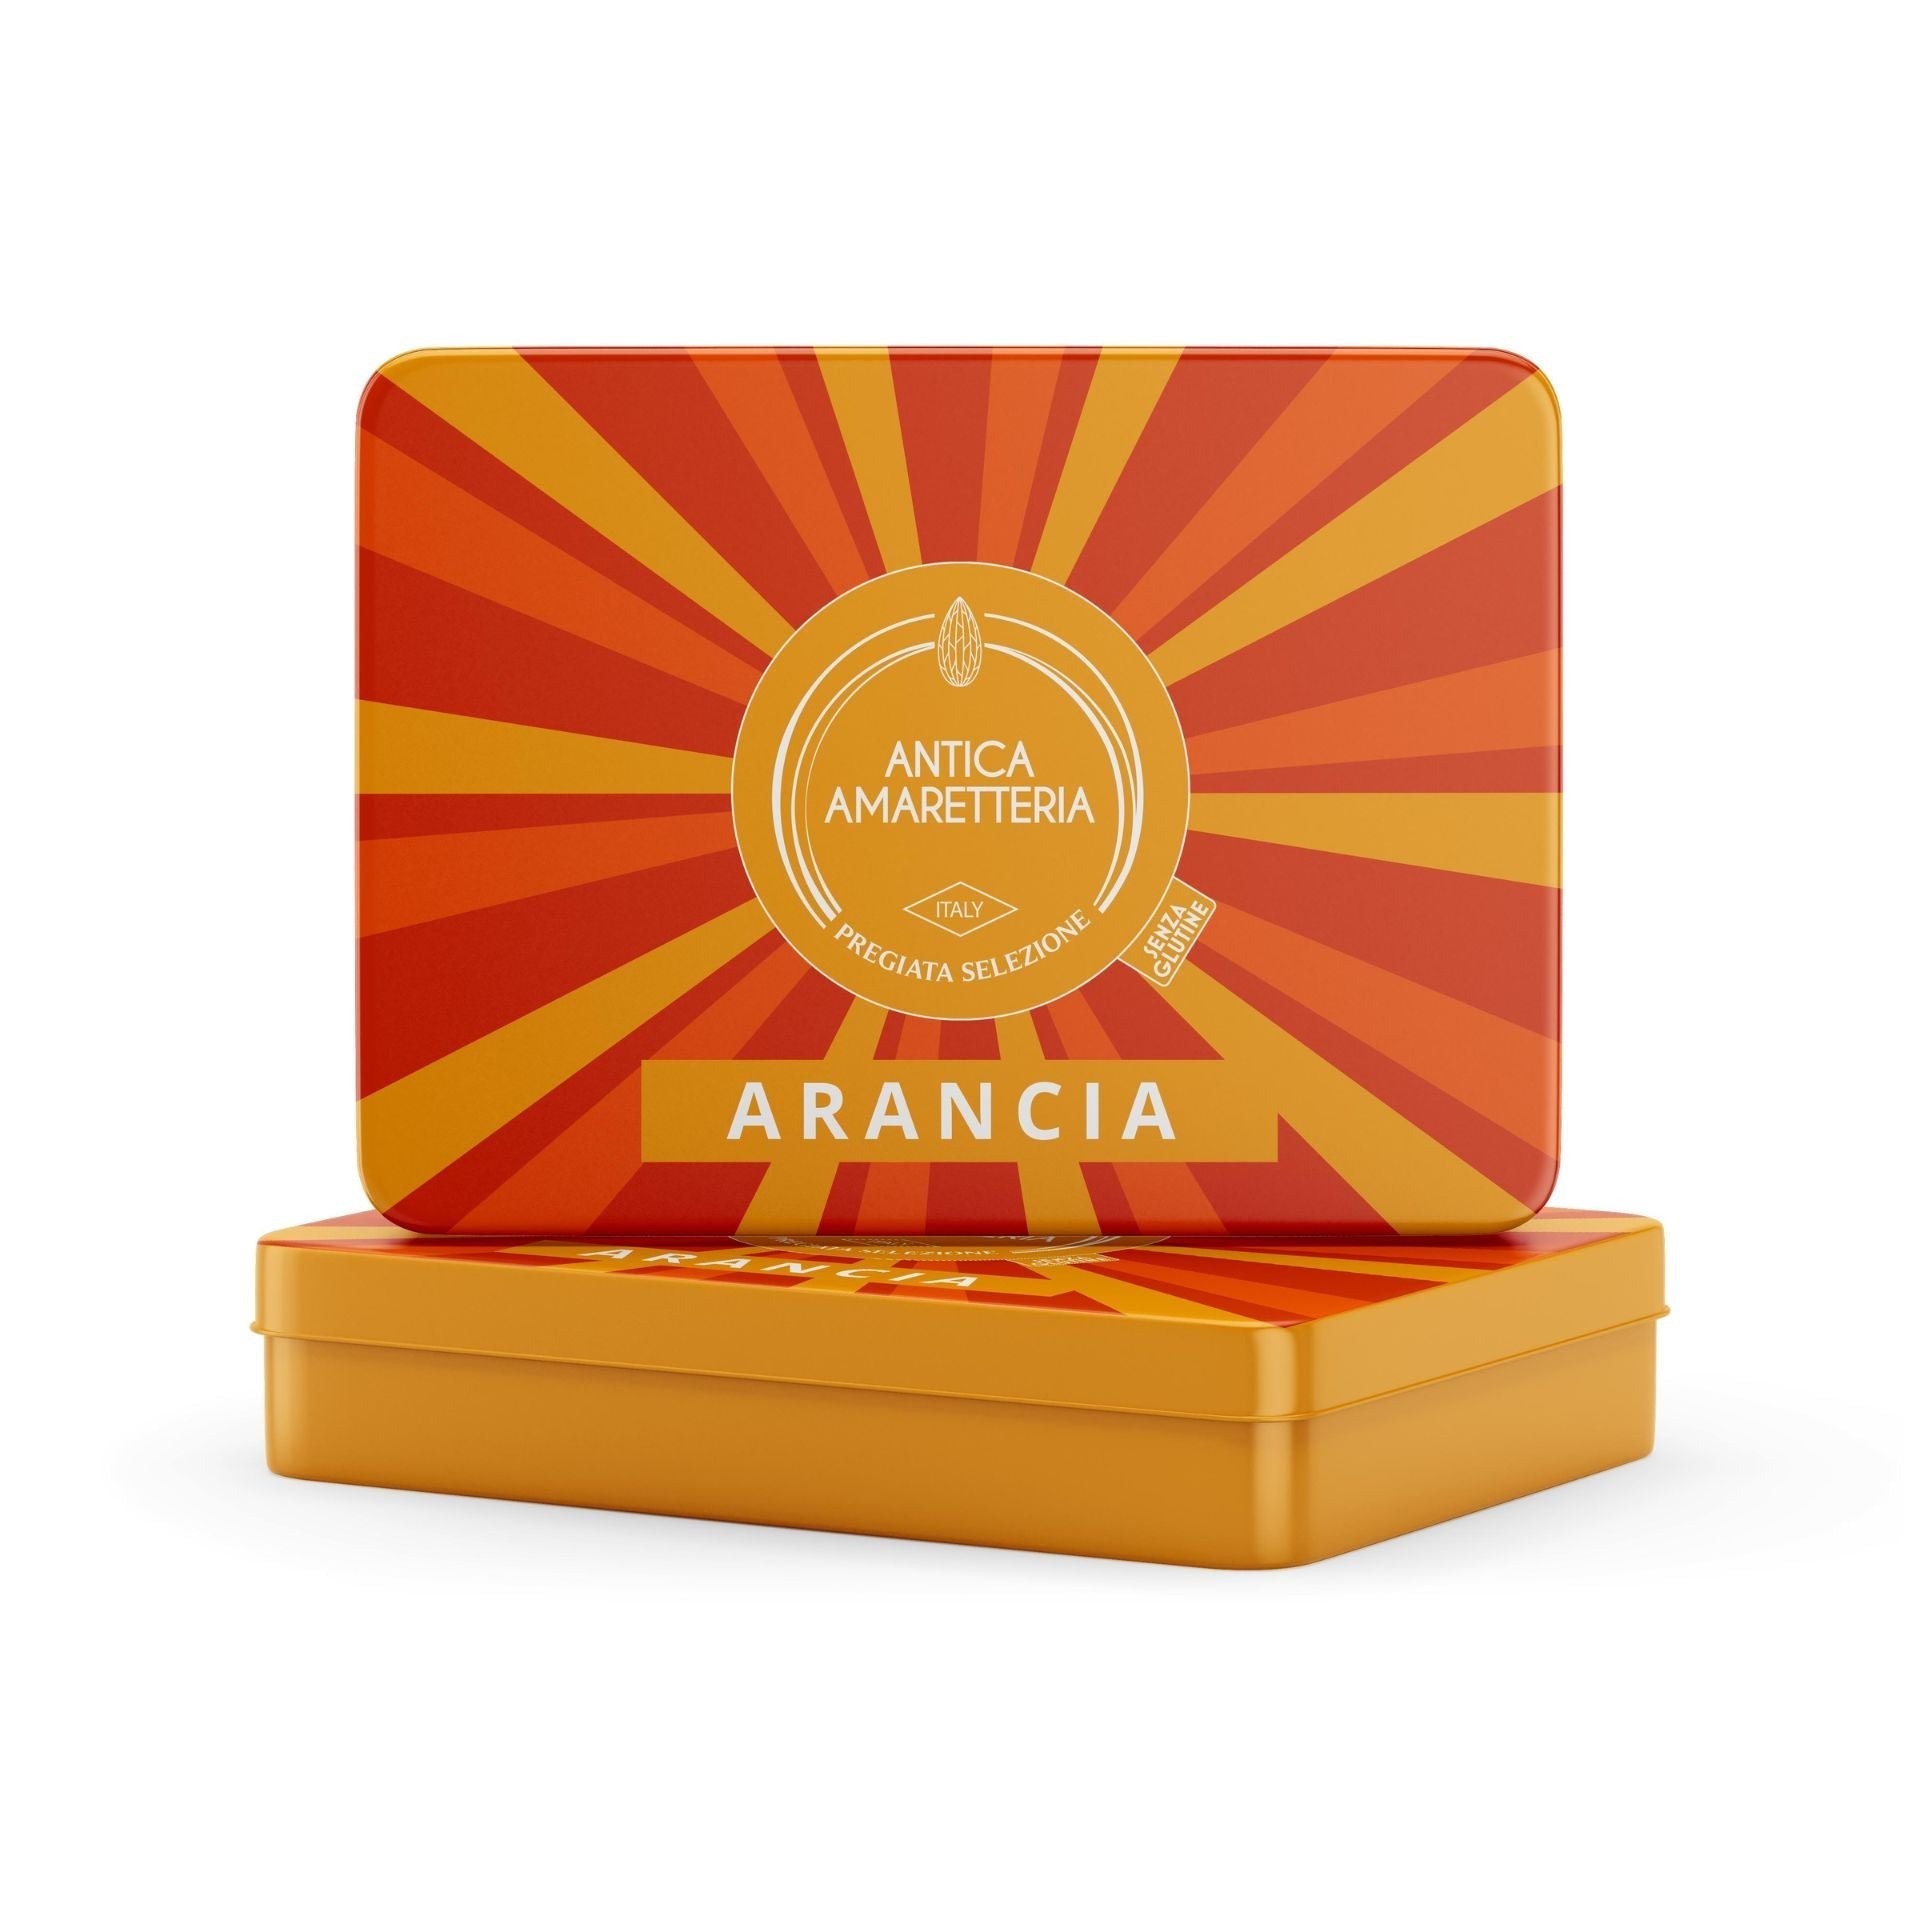 Antica Amaretteria Soft Orange Amaretti 150g (Tin)  | Imported and distributed in the UK by Just Gourmet Foods